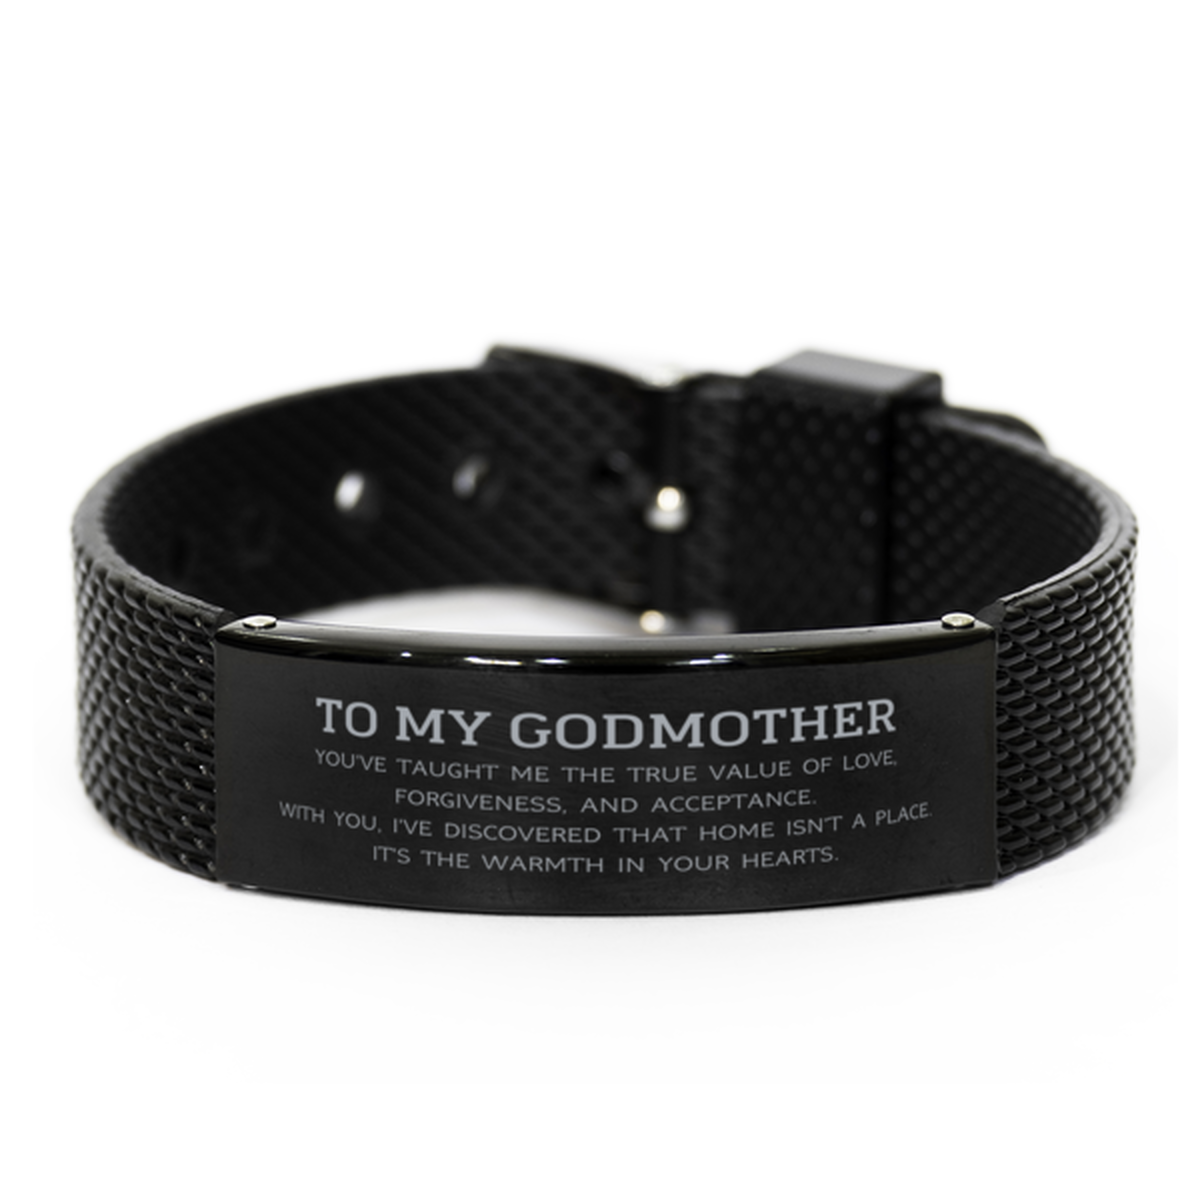 To My Godmother Gifts, You've taught me the true value of love, Thank You Gifts For Godmother, Birthday Black Shark Mesh Bracelet For Godmother